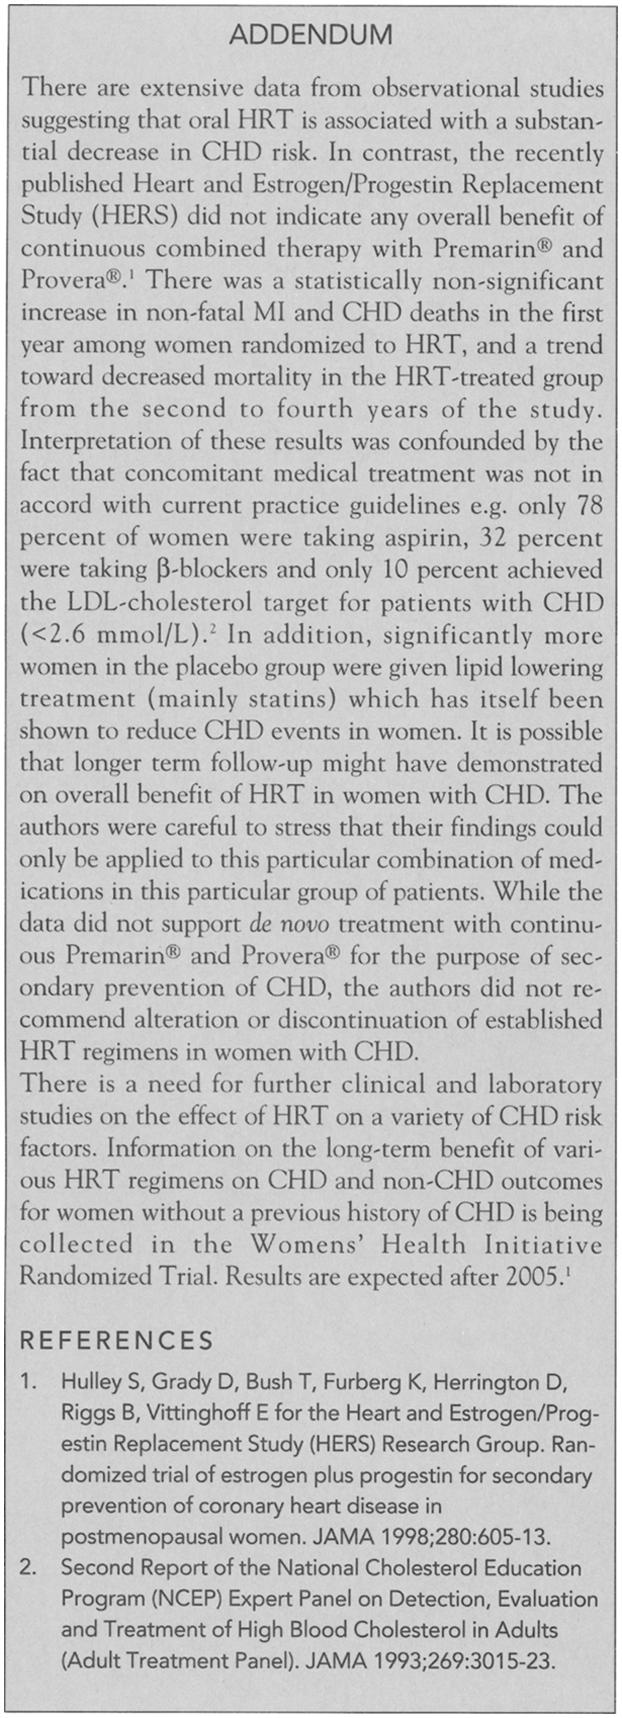 1 There was a statistically non- ignificant increa e in non-fatal MI and CHD death in the fir t year among women randomized to HRT, and a trend toward decrea ed mortality in the HRT-treated group